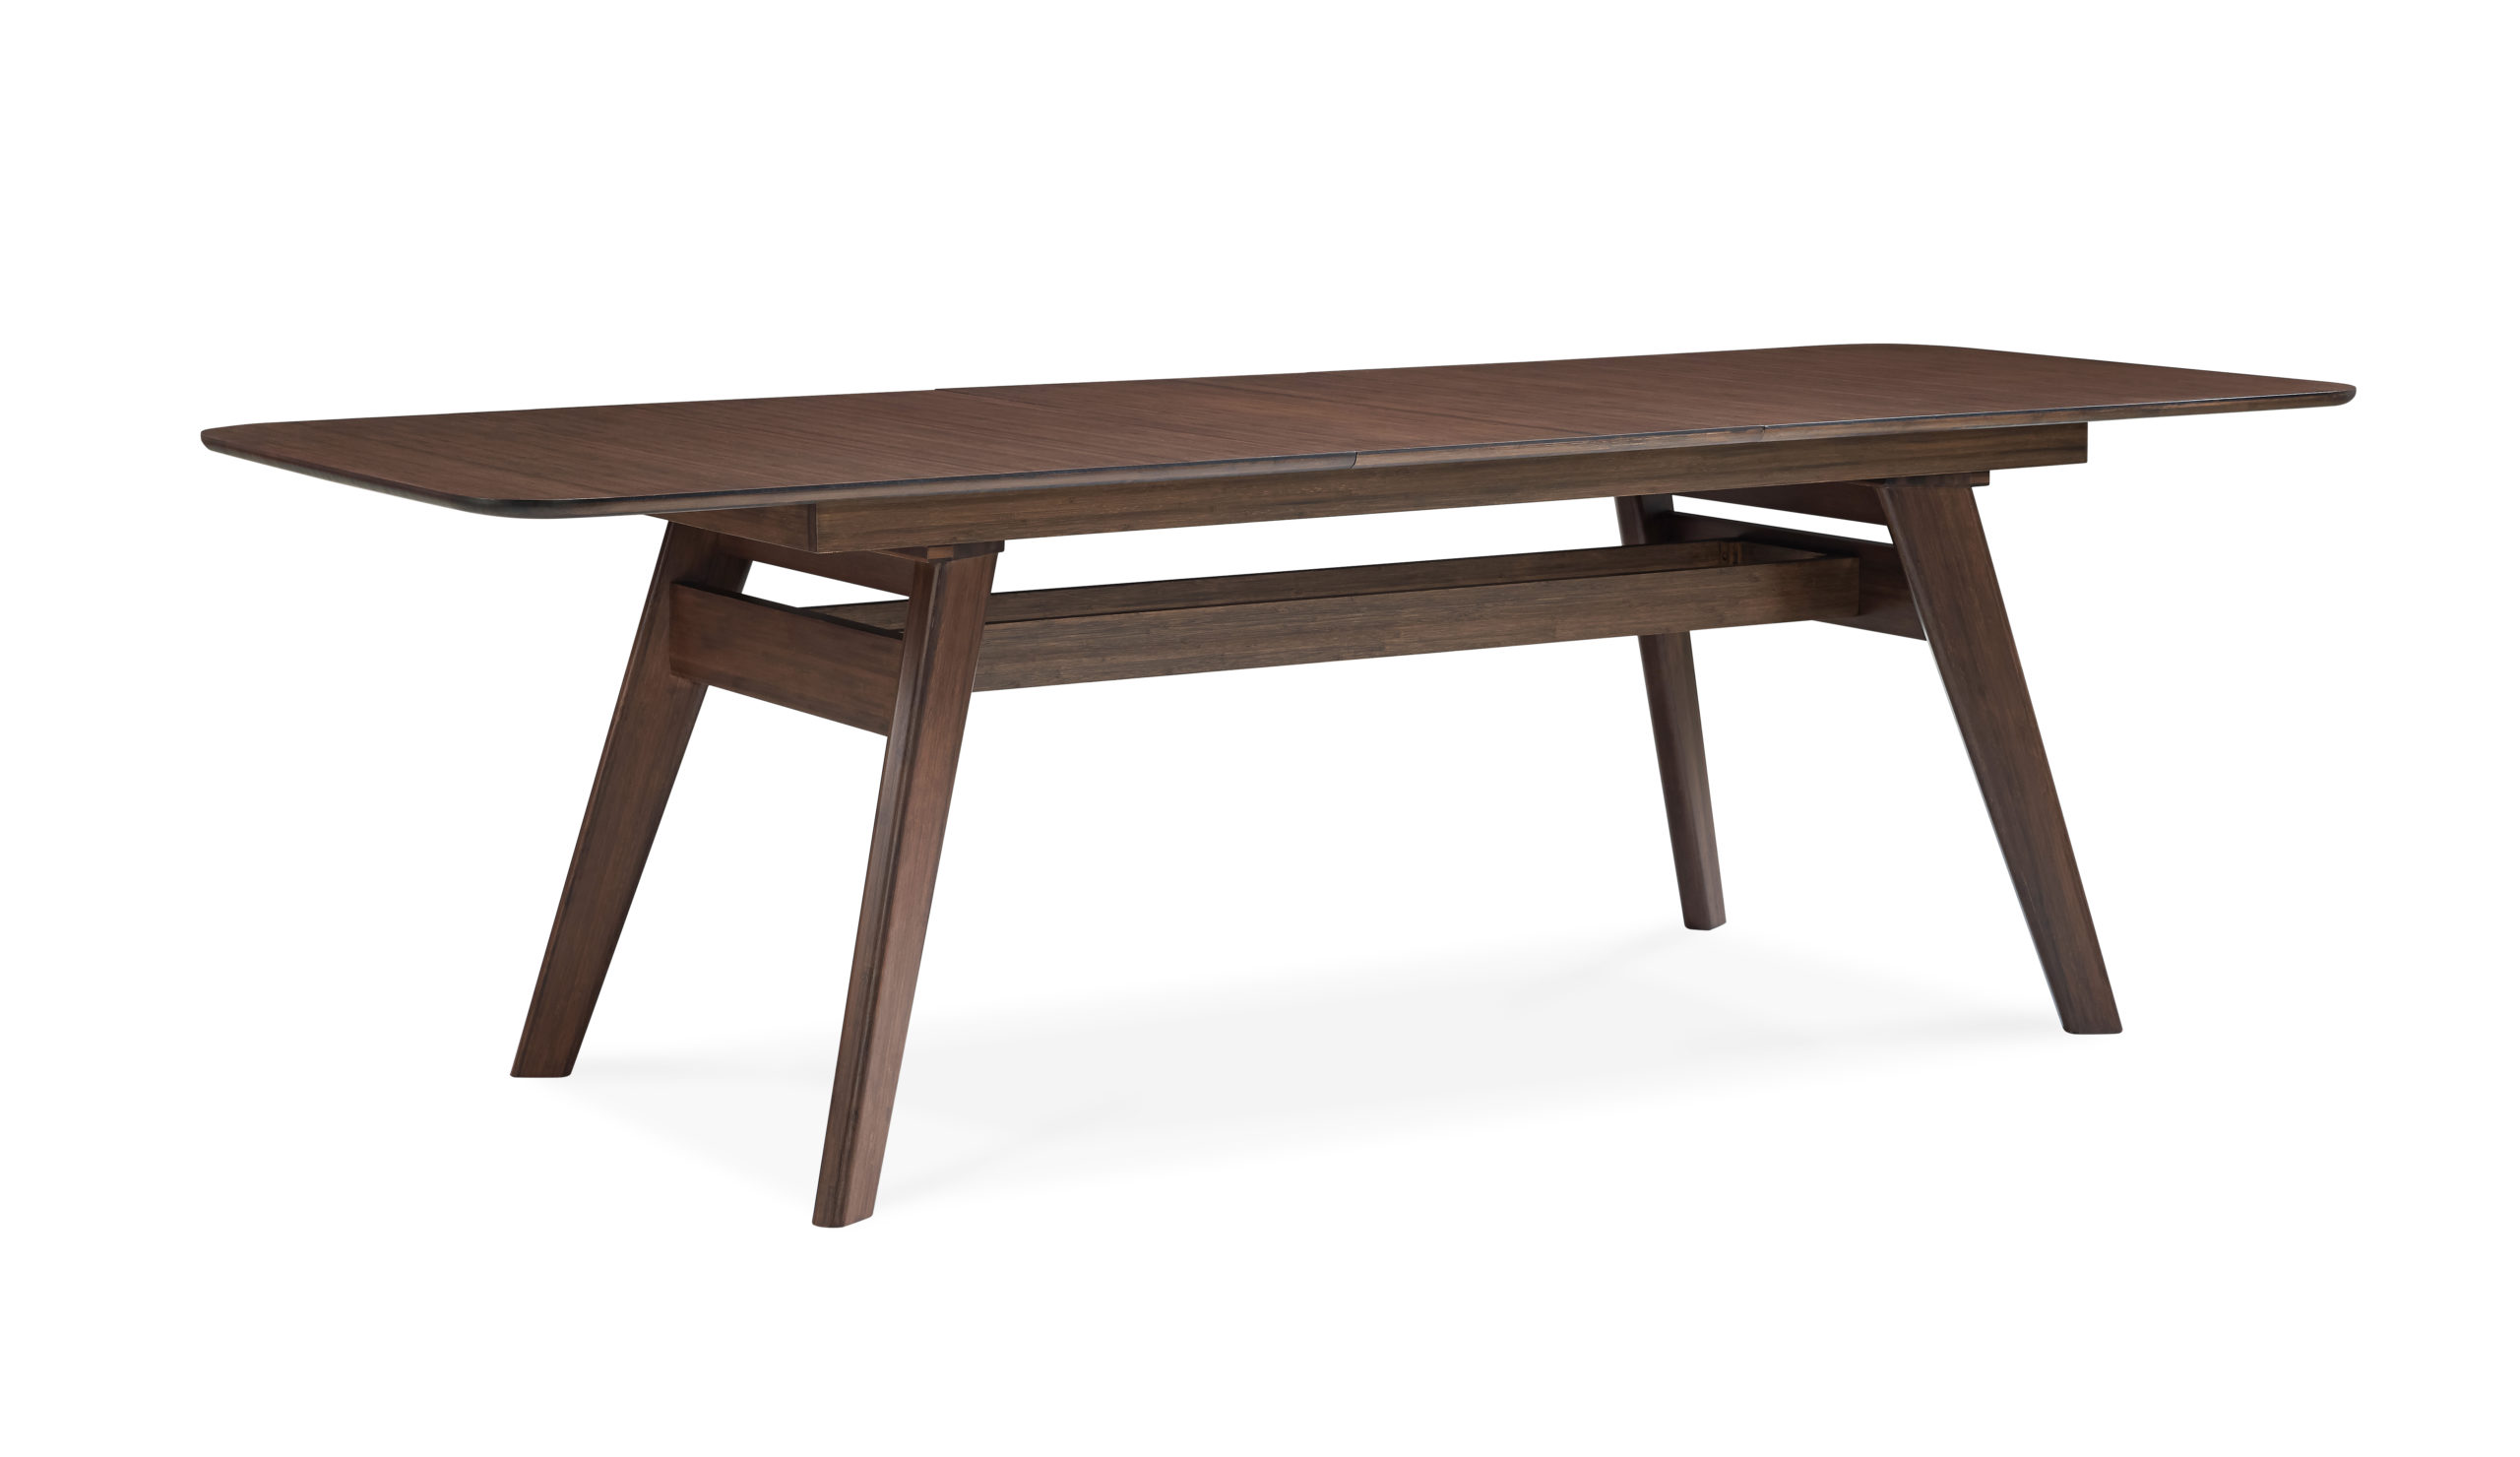 Currant Extension Table [2 colors] [92"]